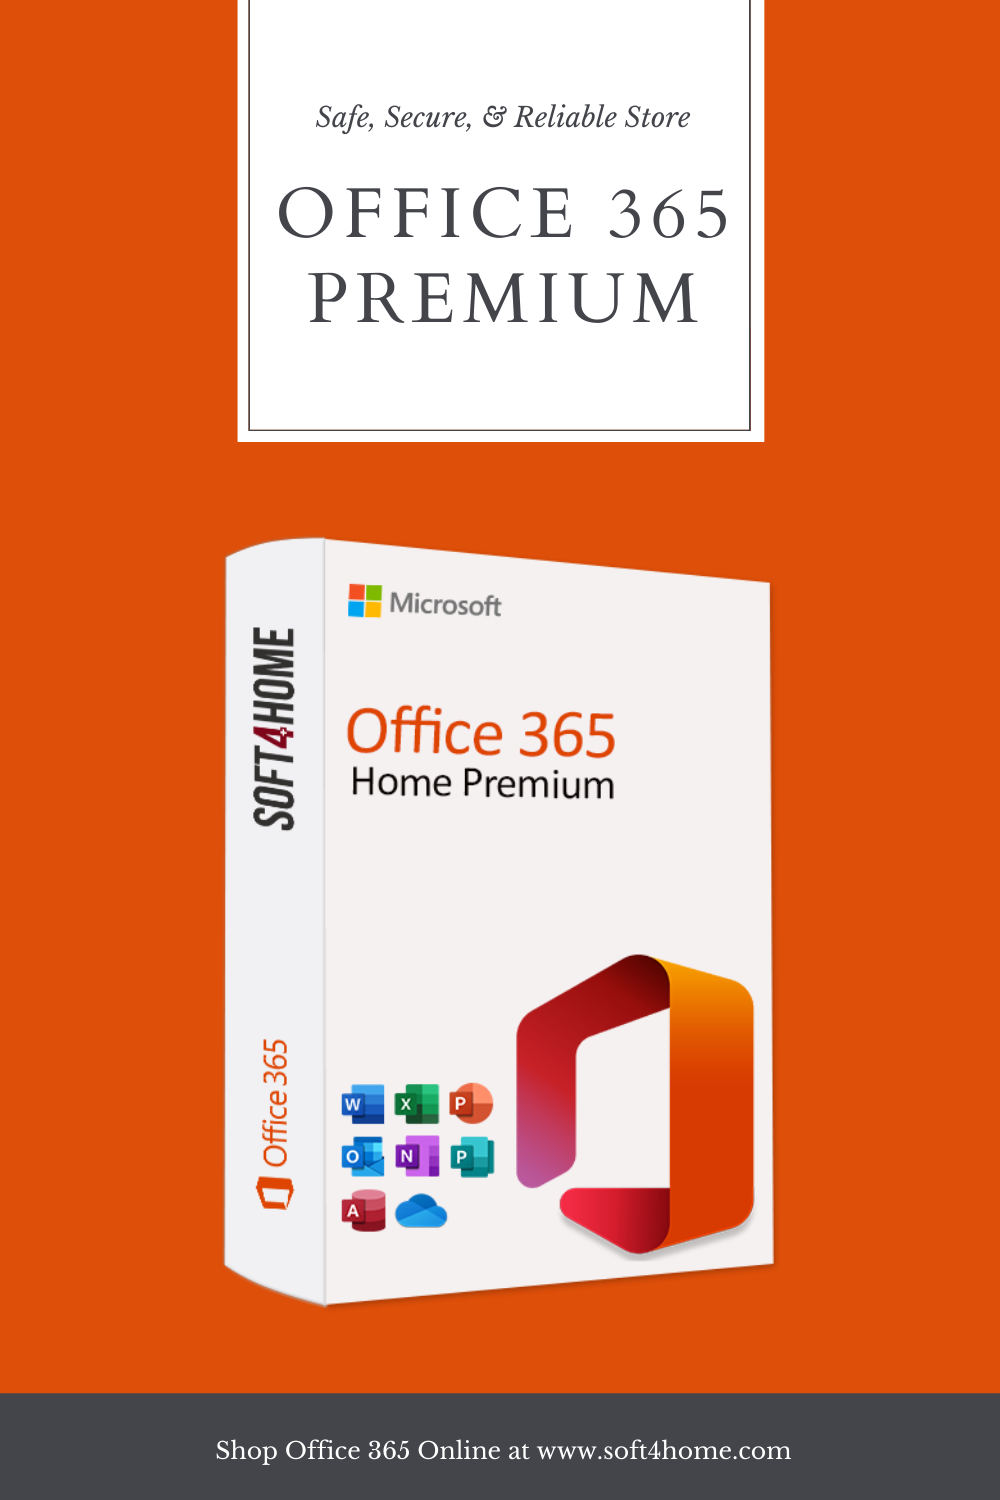 Office 365 Premium By Soft4Home by Soft4Home on